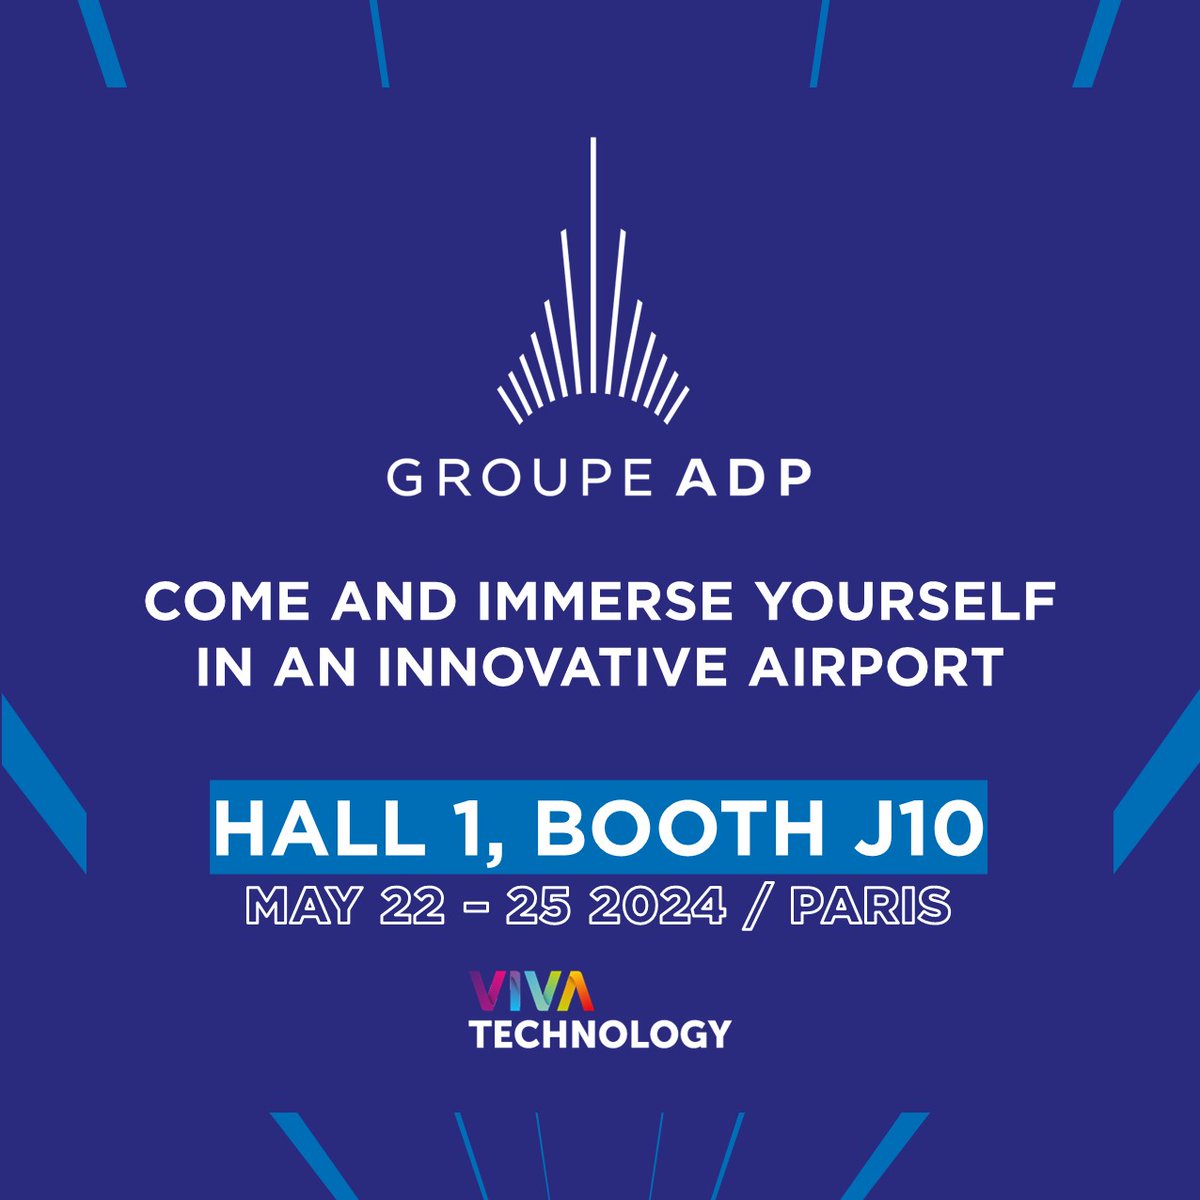 ✈️ Ready for takeoff! At #VivaTech, land in the airport of tomorrow with @GroupeADP and experience the future of travel through an immersive passenger journey, revealing innovative solutions to improve services and ground operations! 🛫